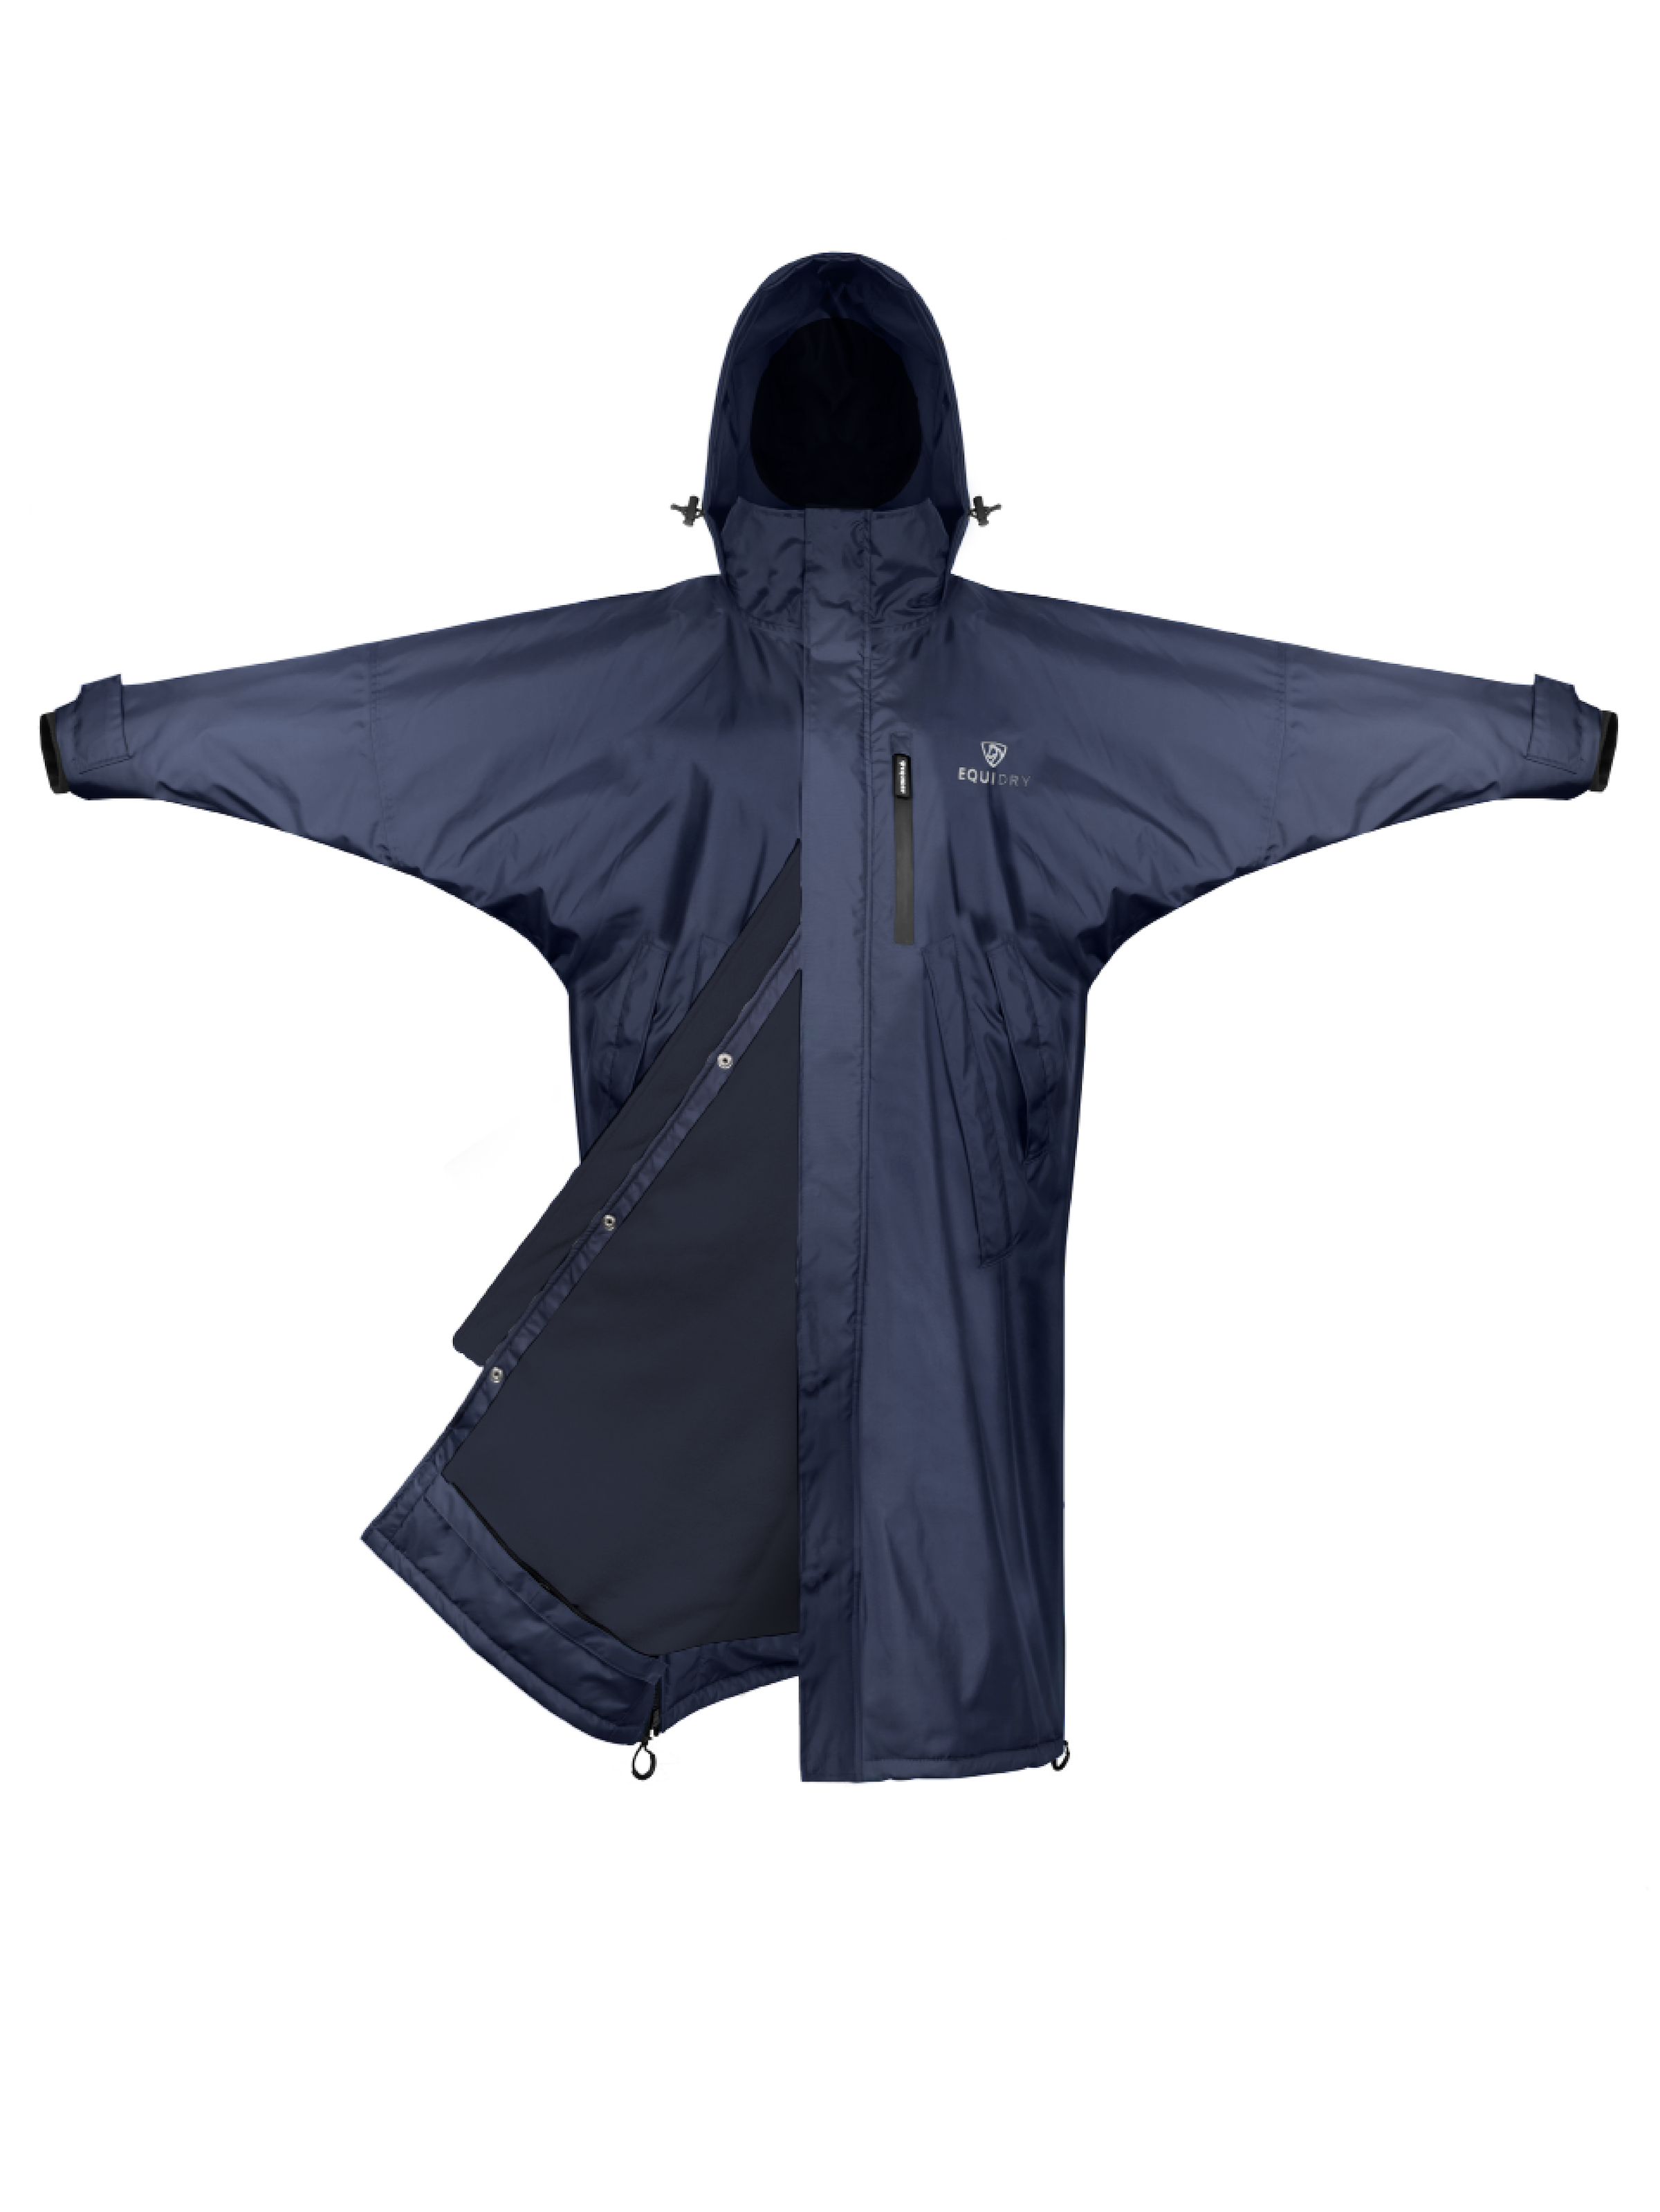 Proride_evo_lite_ID_front_navy_2a124926-08f6-46f7-bbdd-758123123efe.png